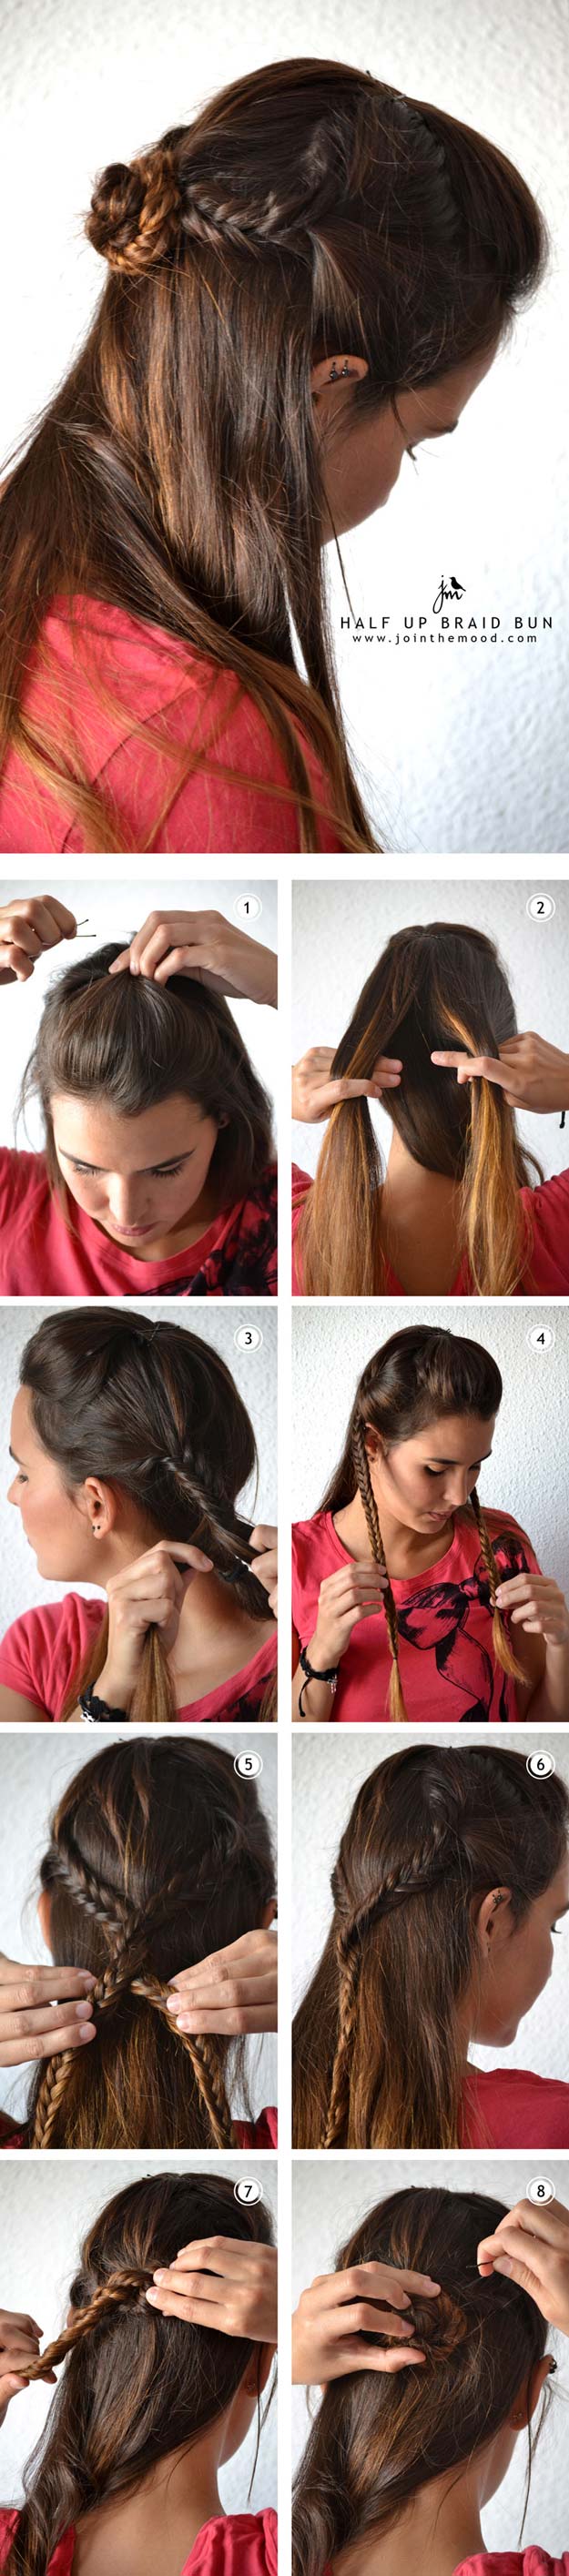 Best Hairstyles for Long Hair - Half Bun Braid - Step by Step Tutorials for Easy Curls, Updo, Half Up, Braids and Lazy Girl Looks. Prom Ideas, Special Occasion Hair and Braiding Instructions for Teens, Teenagers and Adults, Women and Girls 